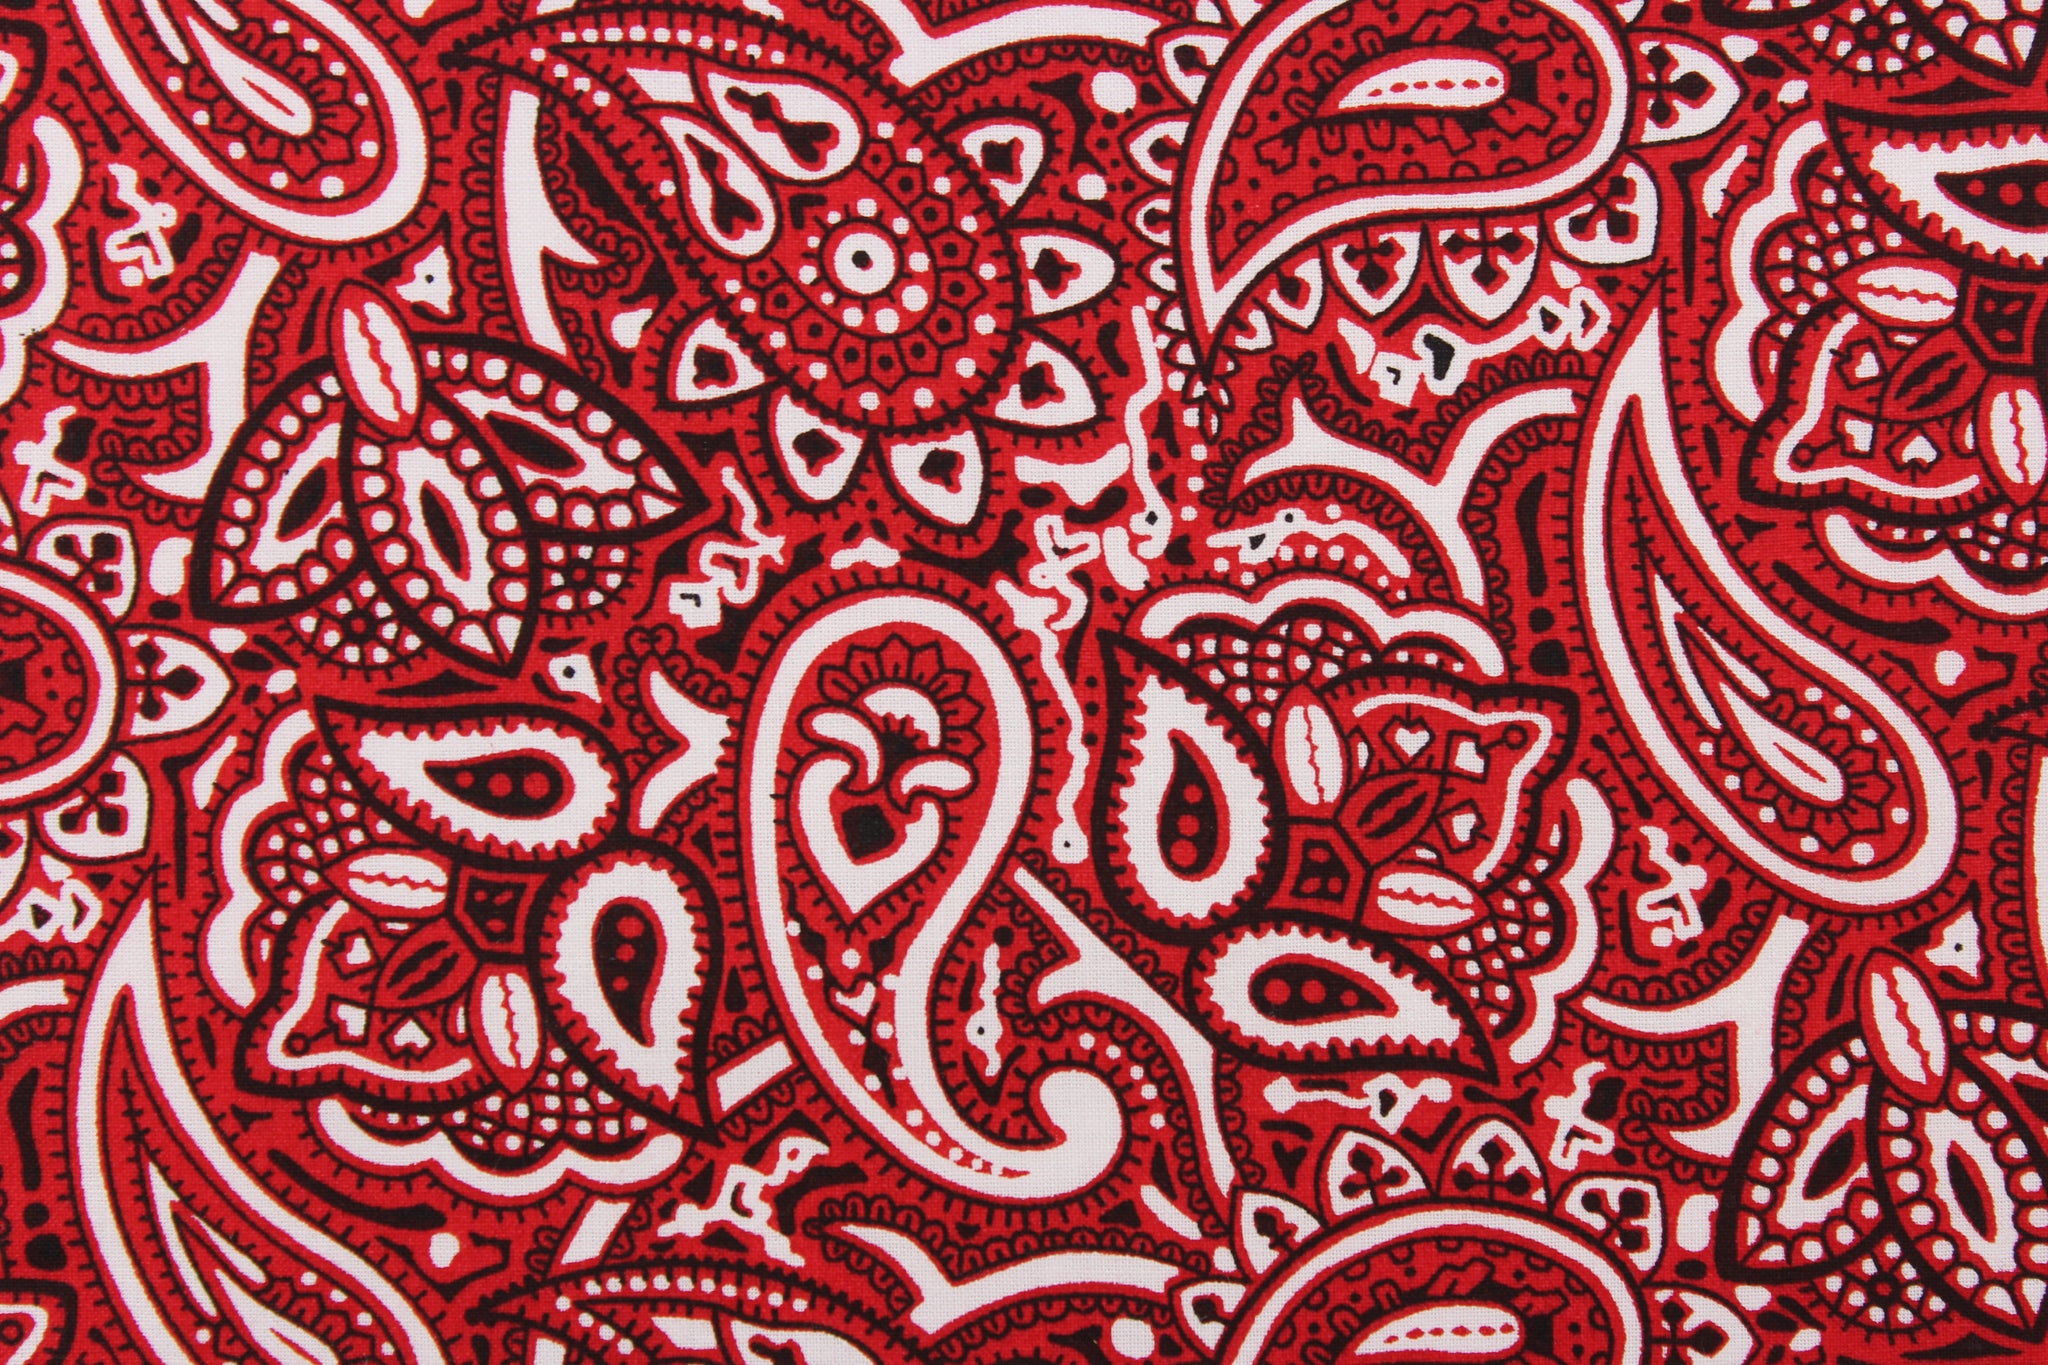 Quilting Paisley Bandana in Red - All About Fabrics